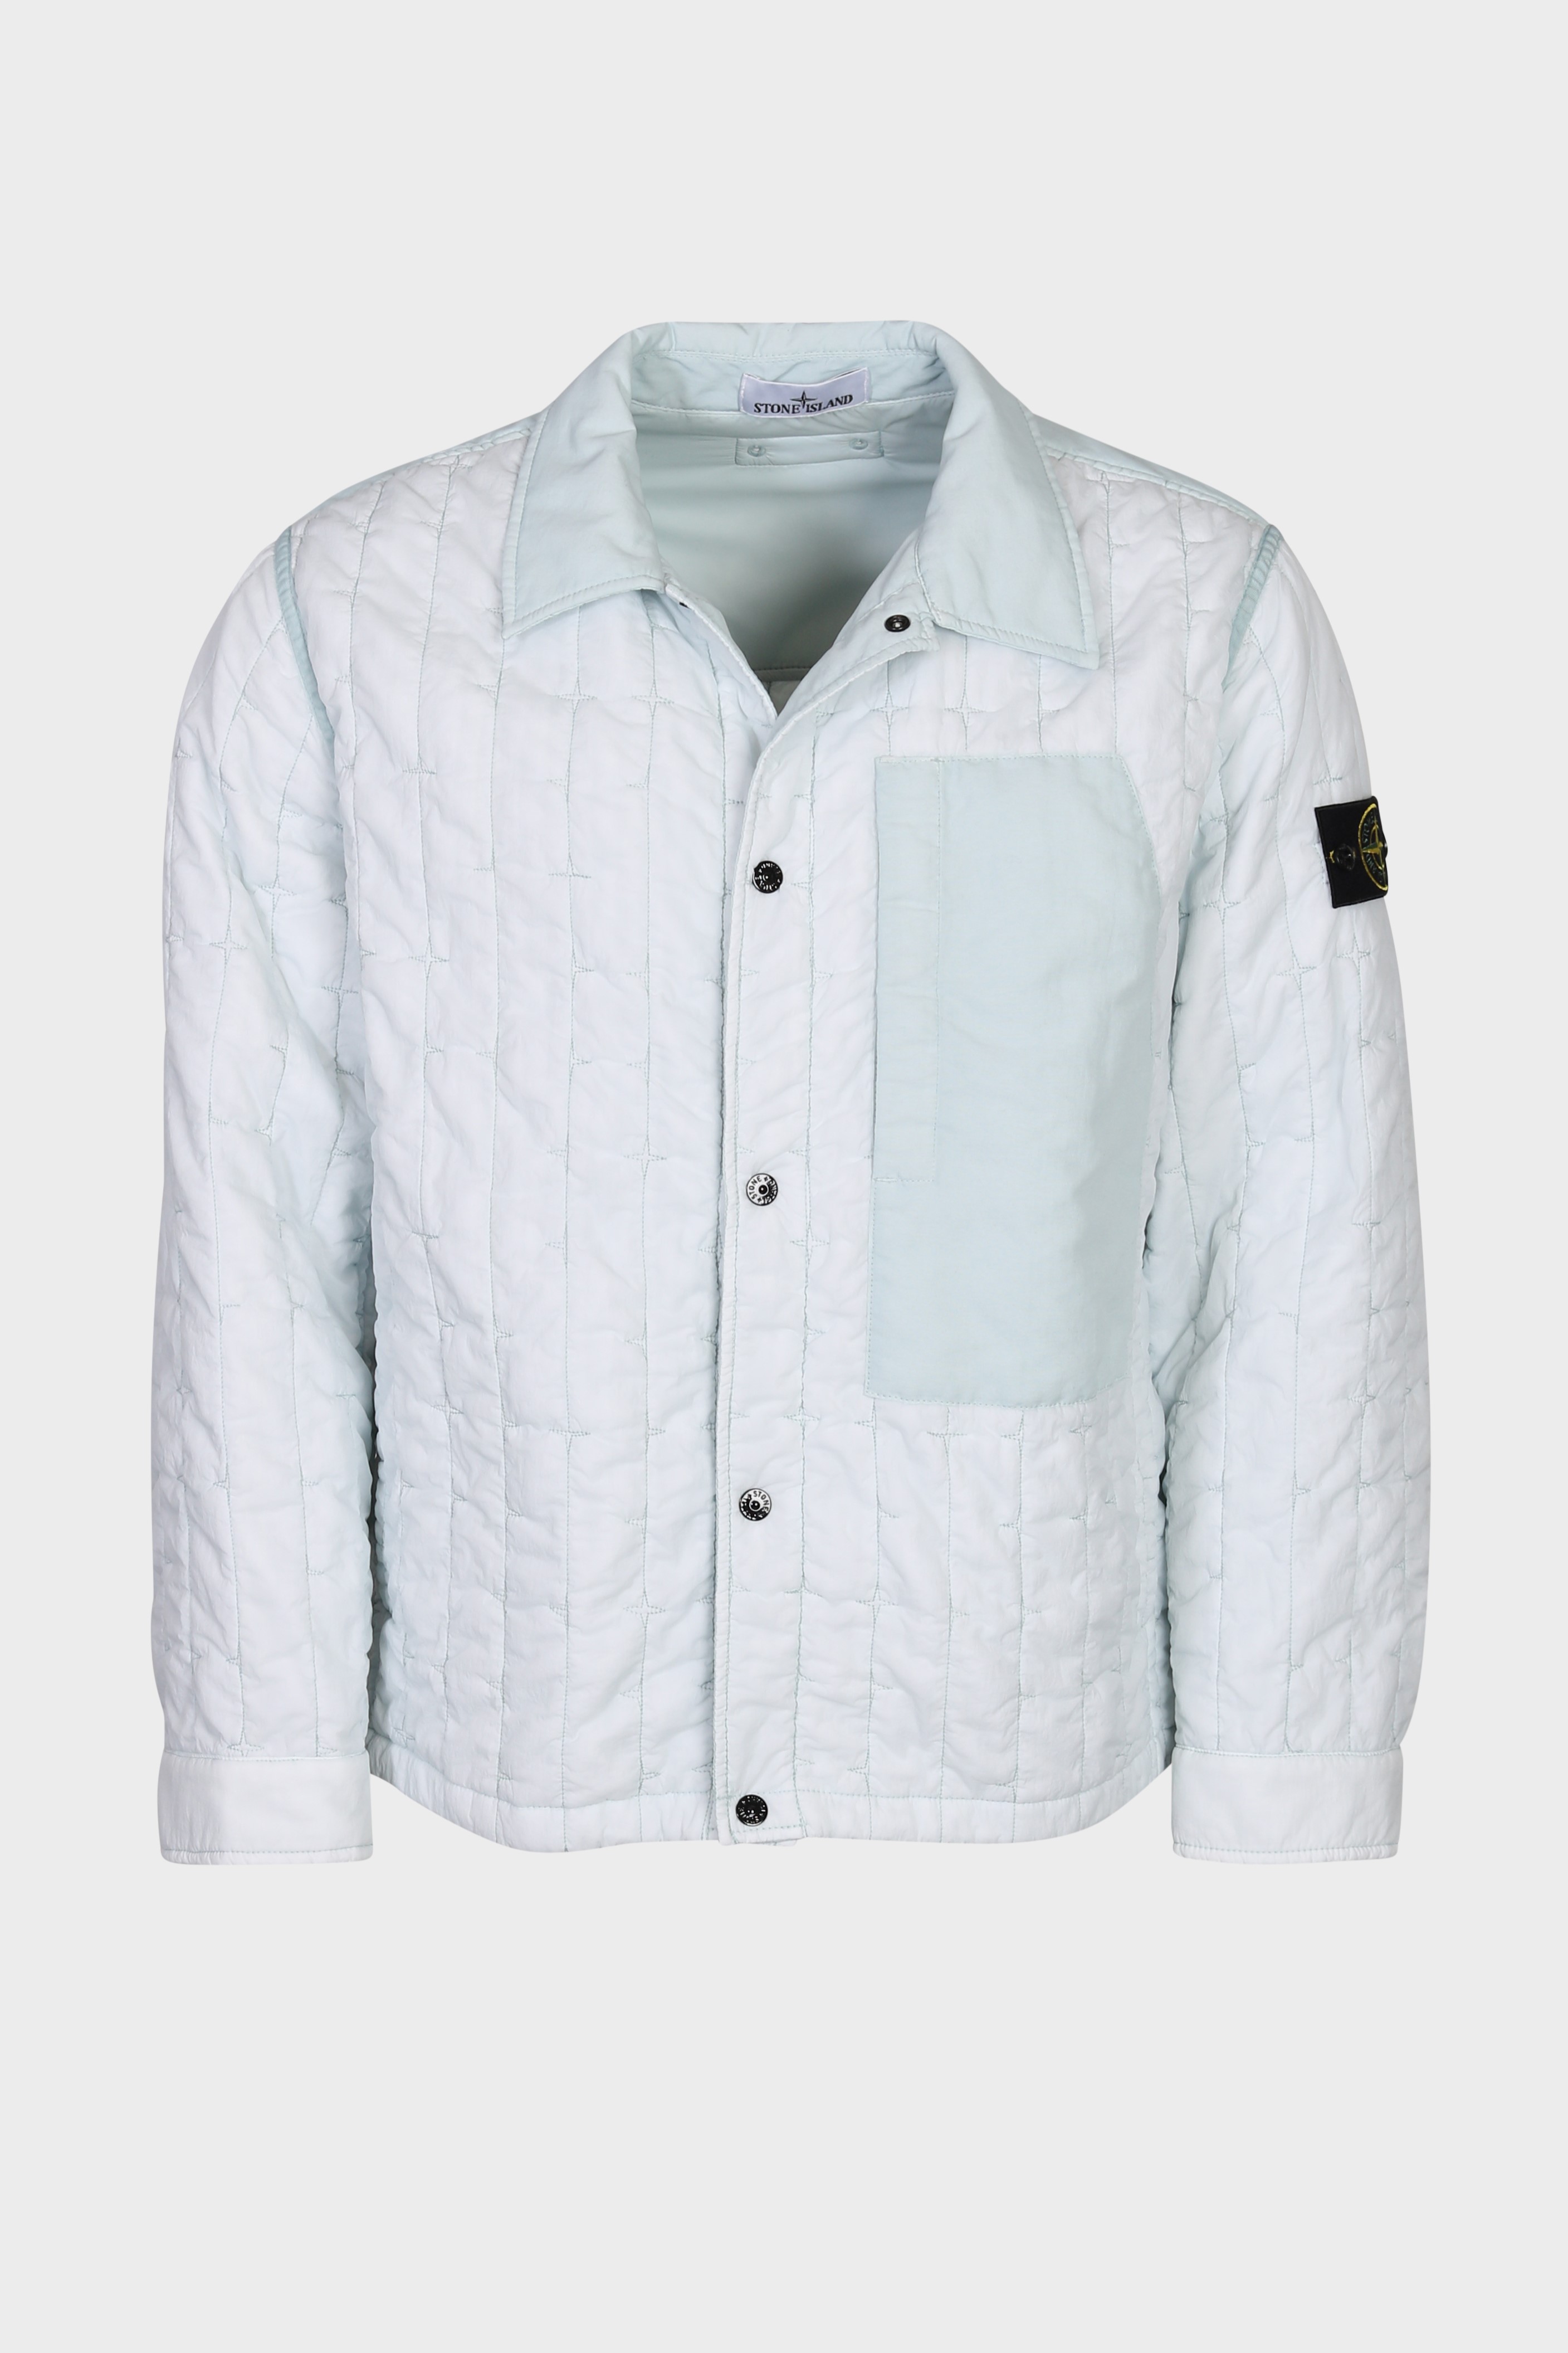 STONE ISLAND Quilted Nylon Stella Jacket in Sky Blue